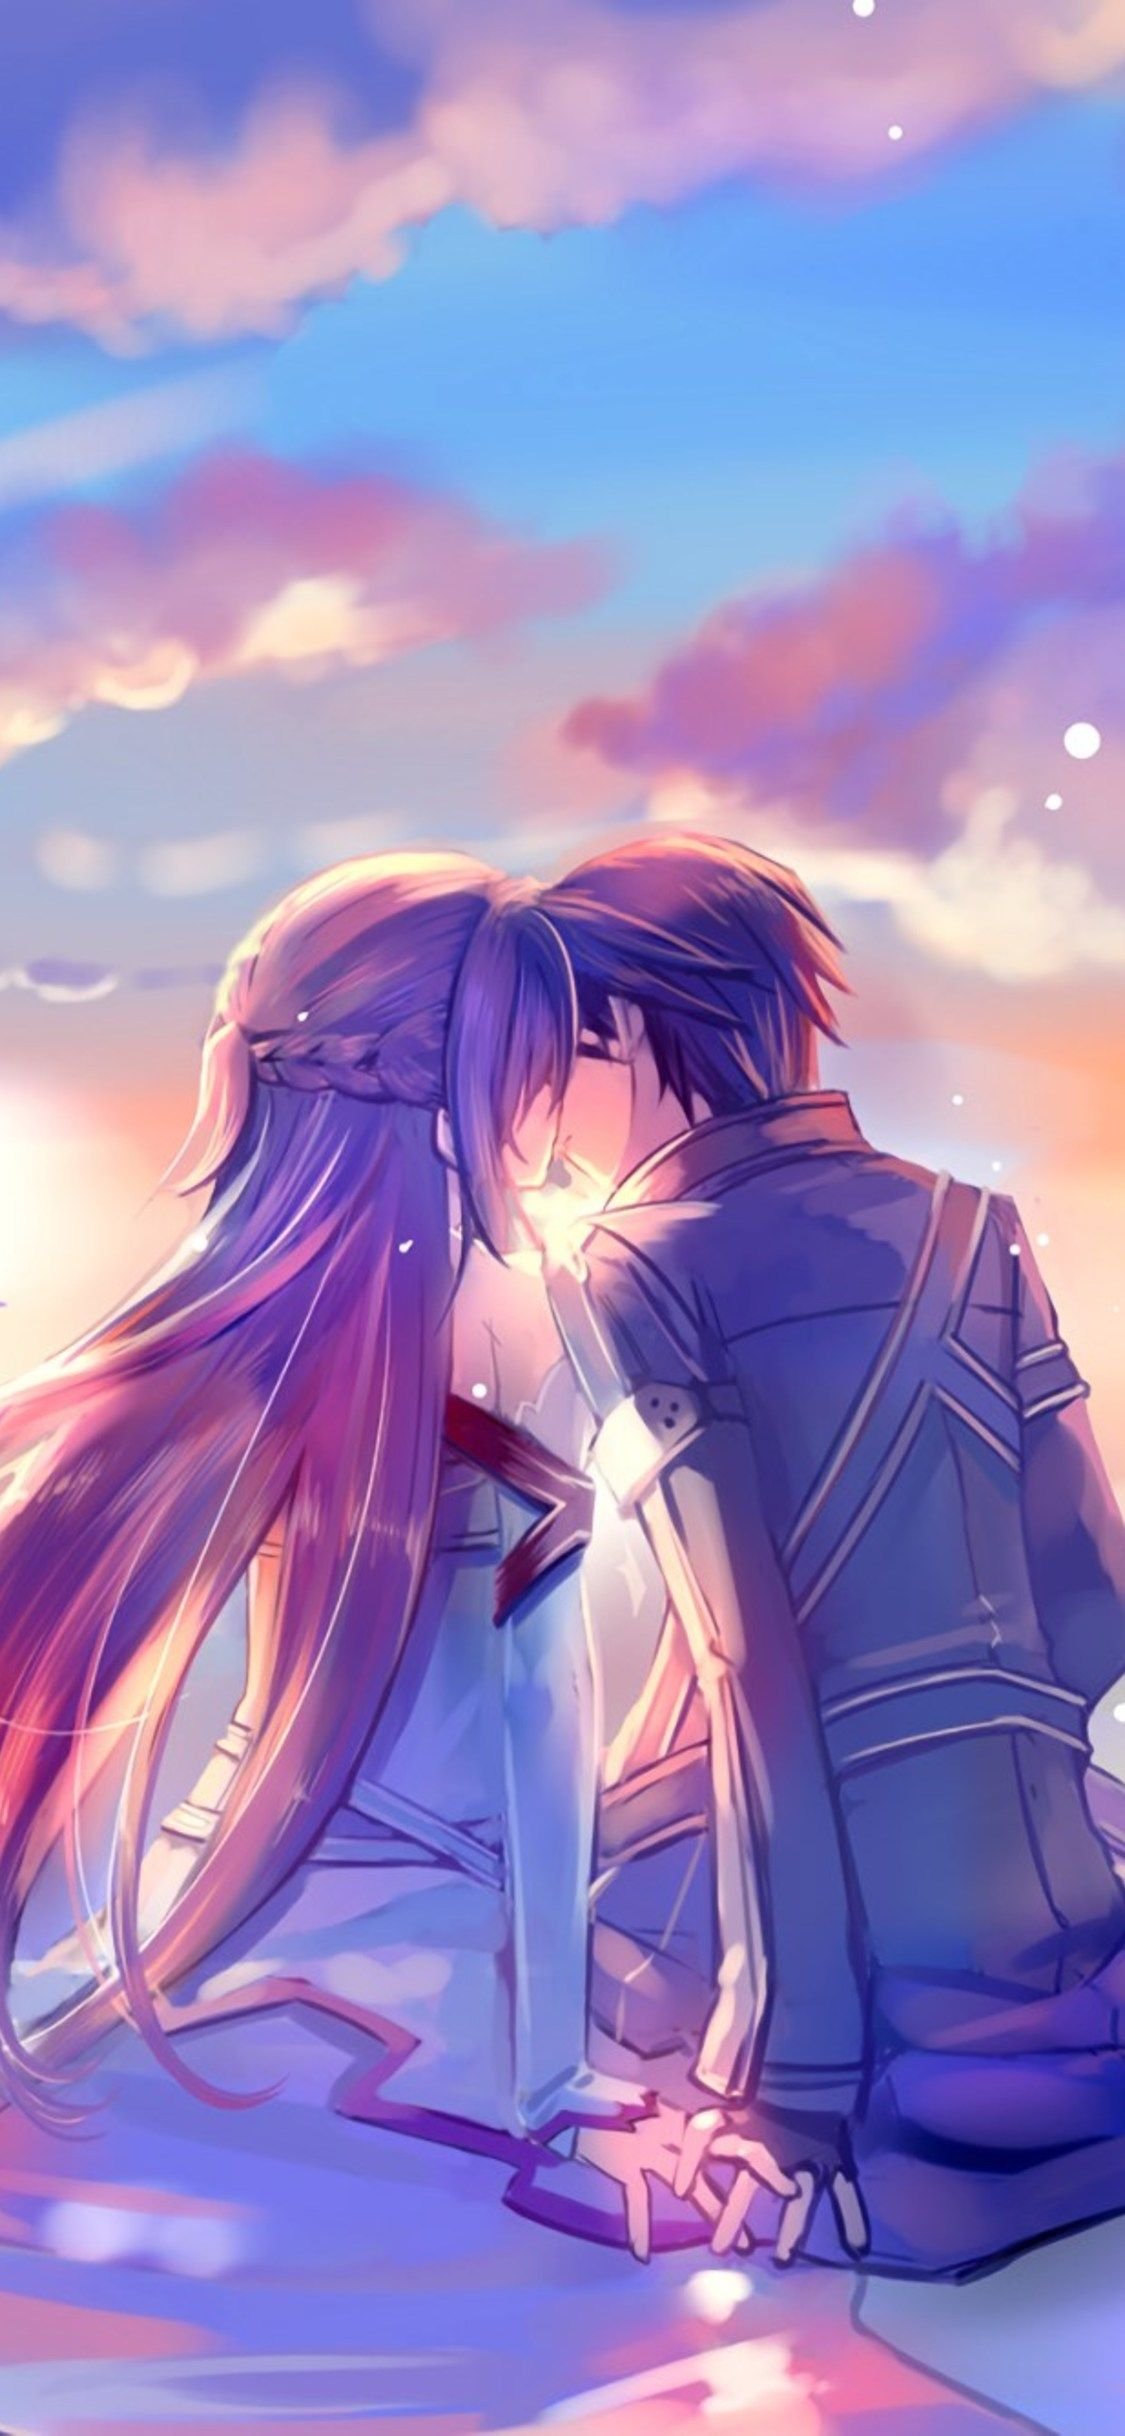 Anime Couple Png Images Transparent Free Download  Cute Shy Anime Couples  PNG Image  Transparent PNG Free Download on SeekPNG